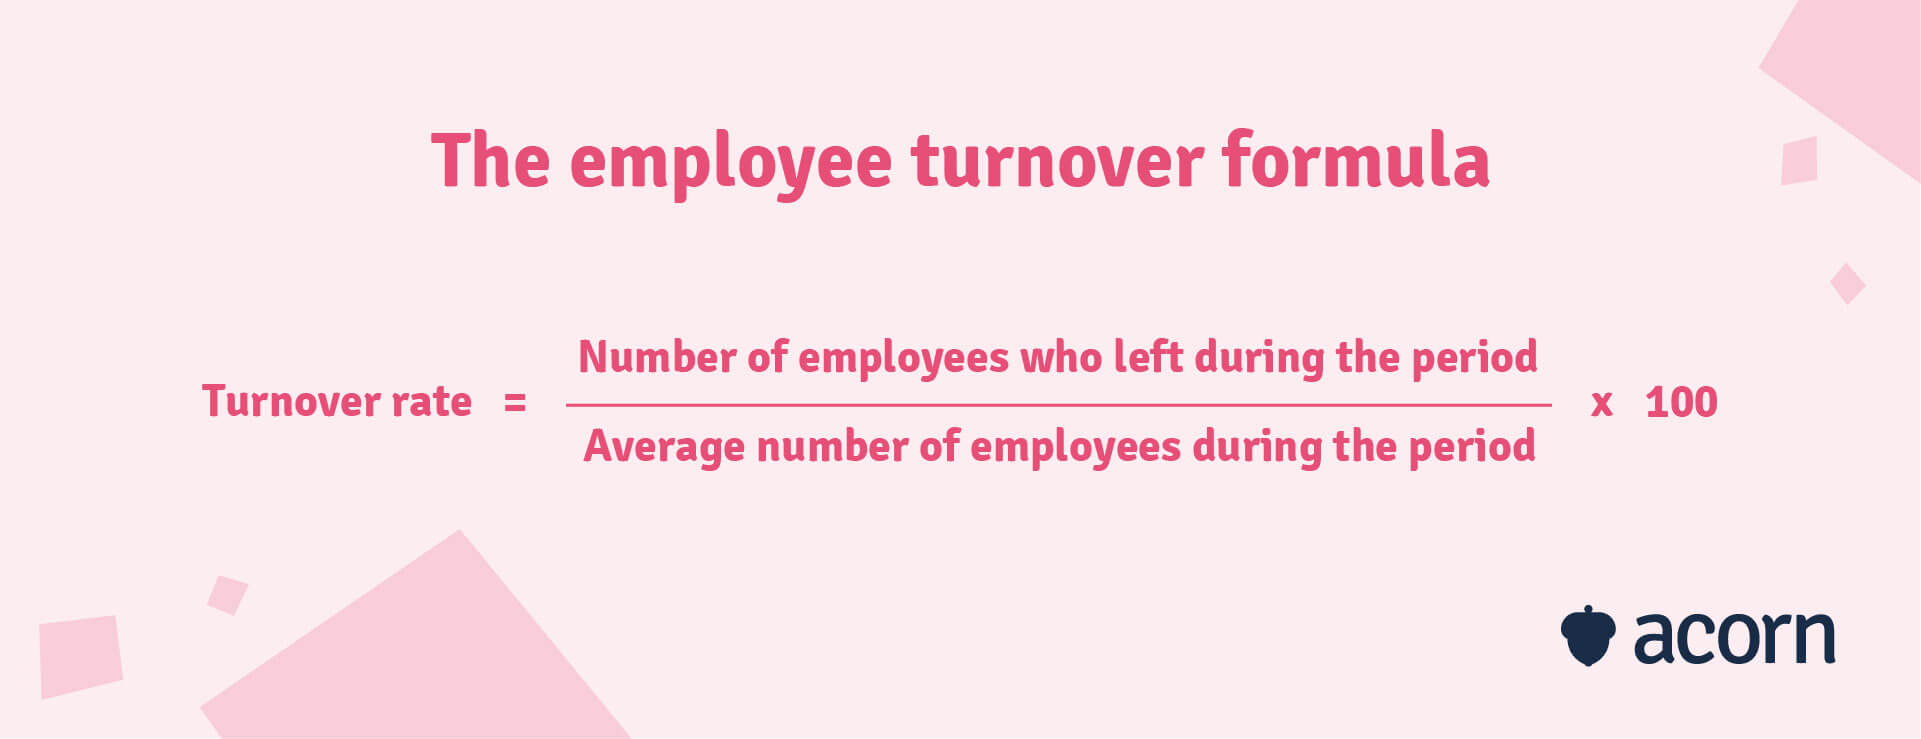 The employee turnover rate formula